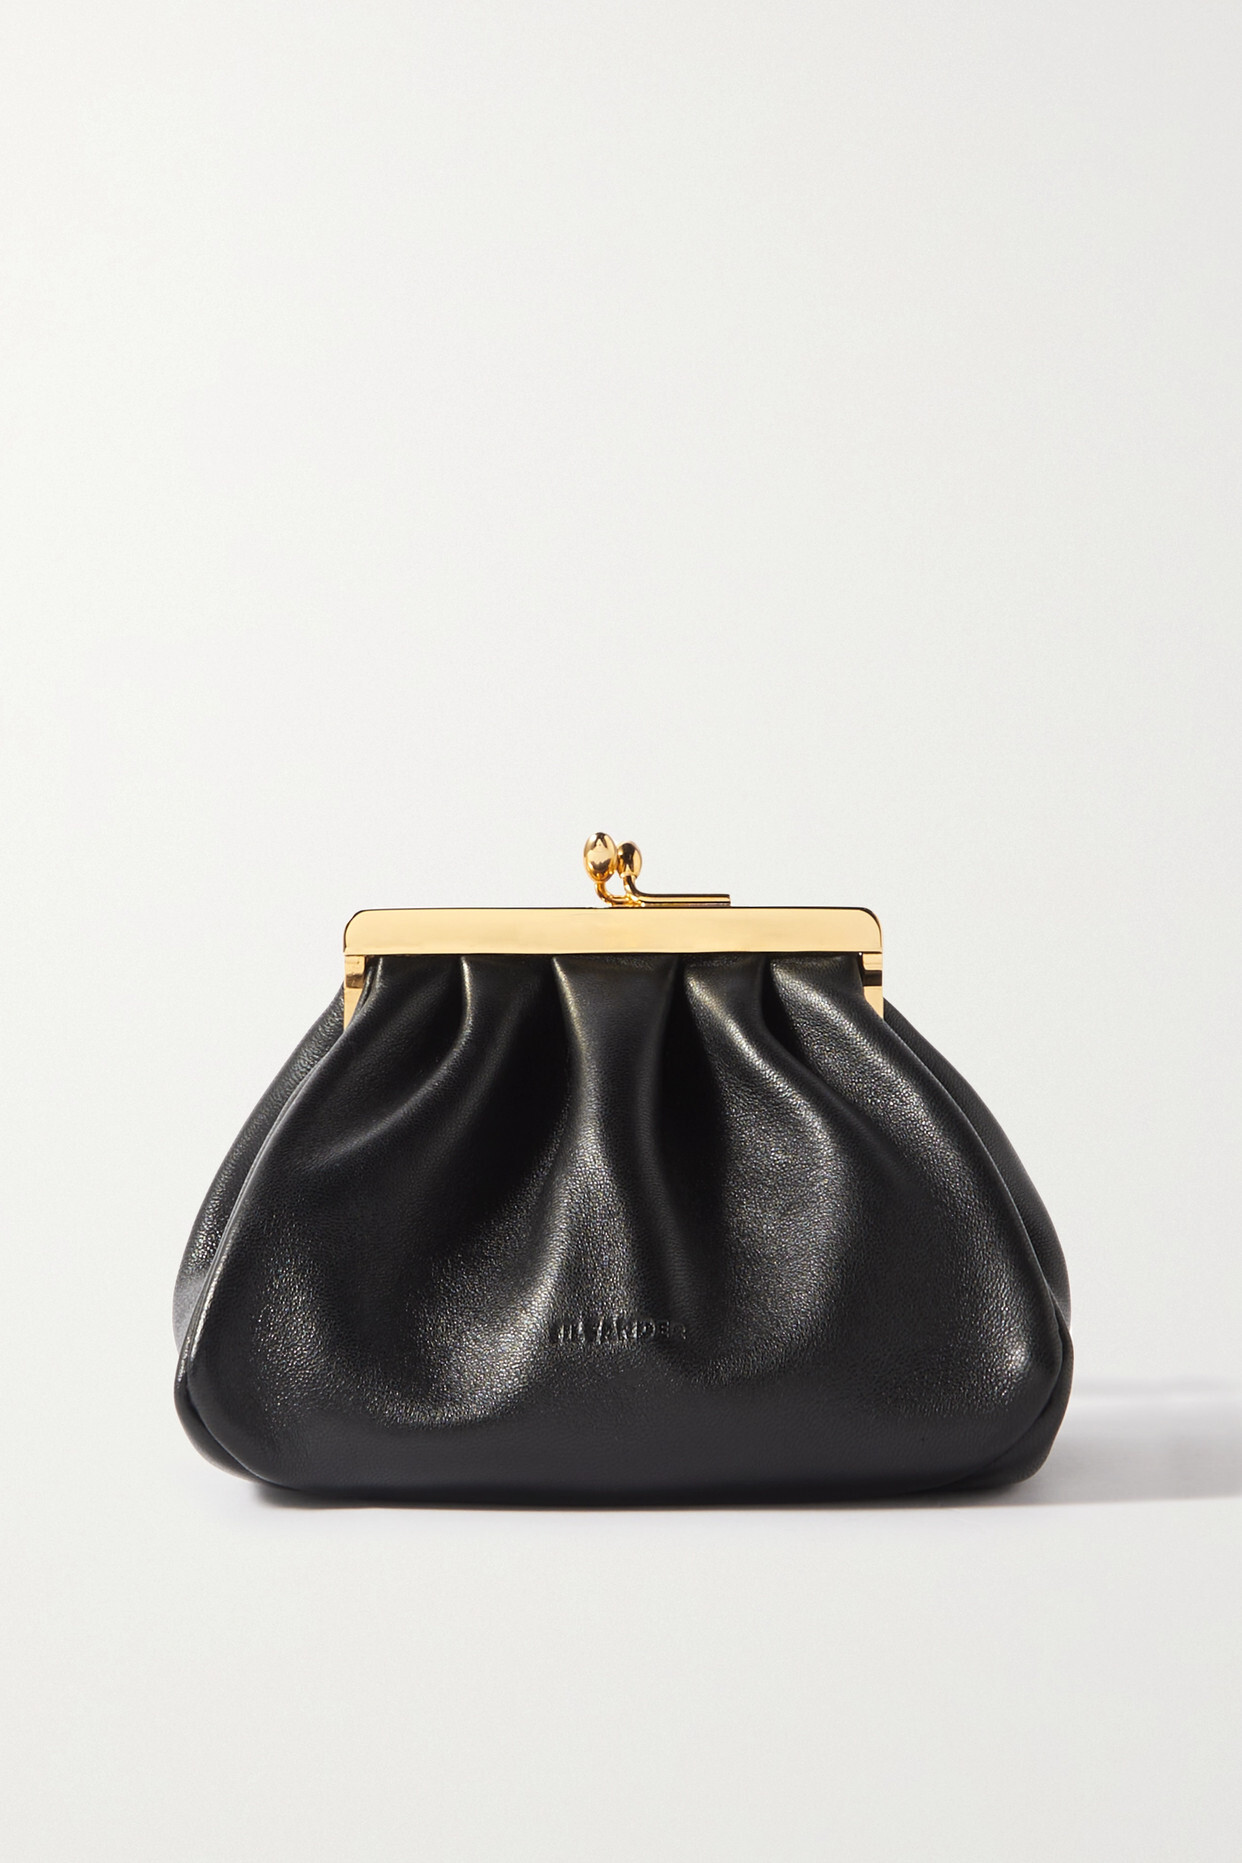 Jil Sander - Small Gathered Leather Pouch - Black